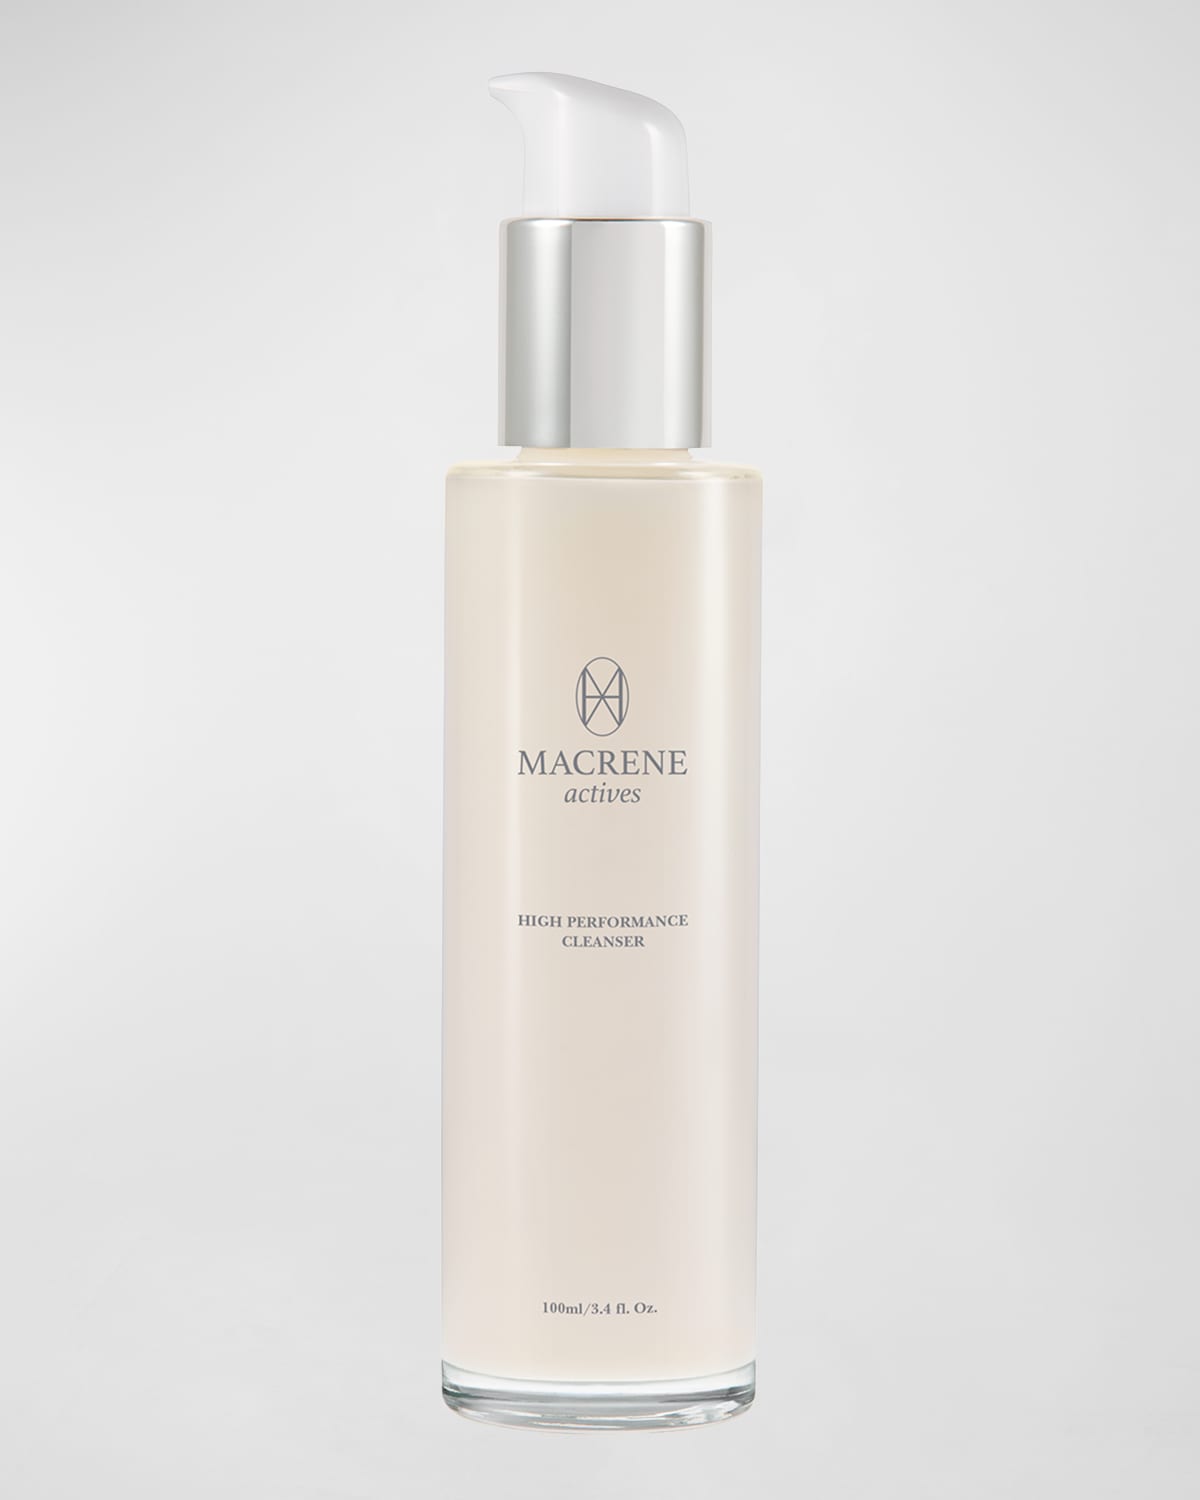 High Performance Cleansing Treatment, 3.4 oz.